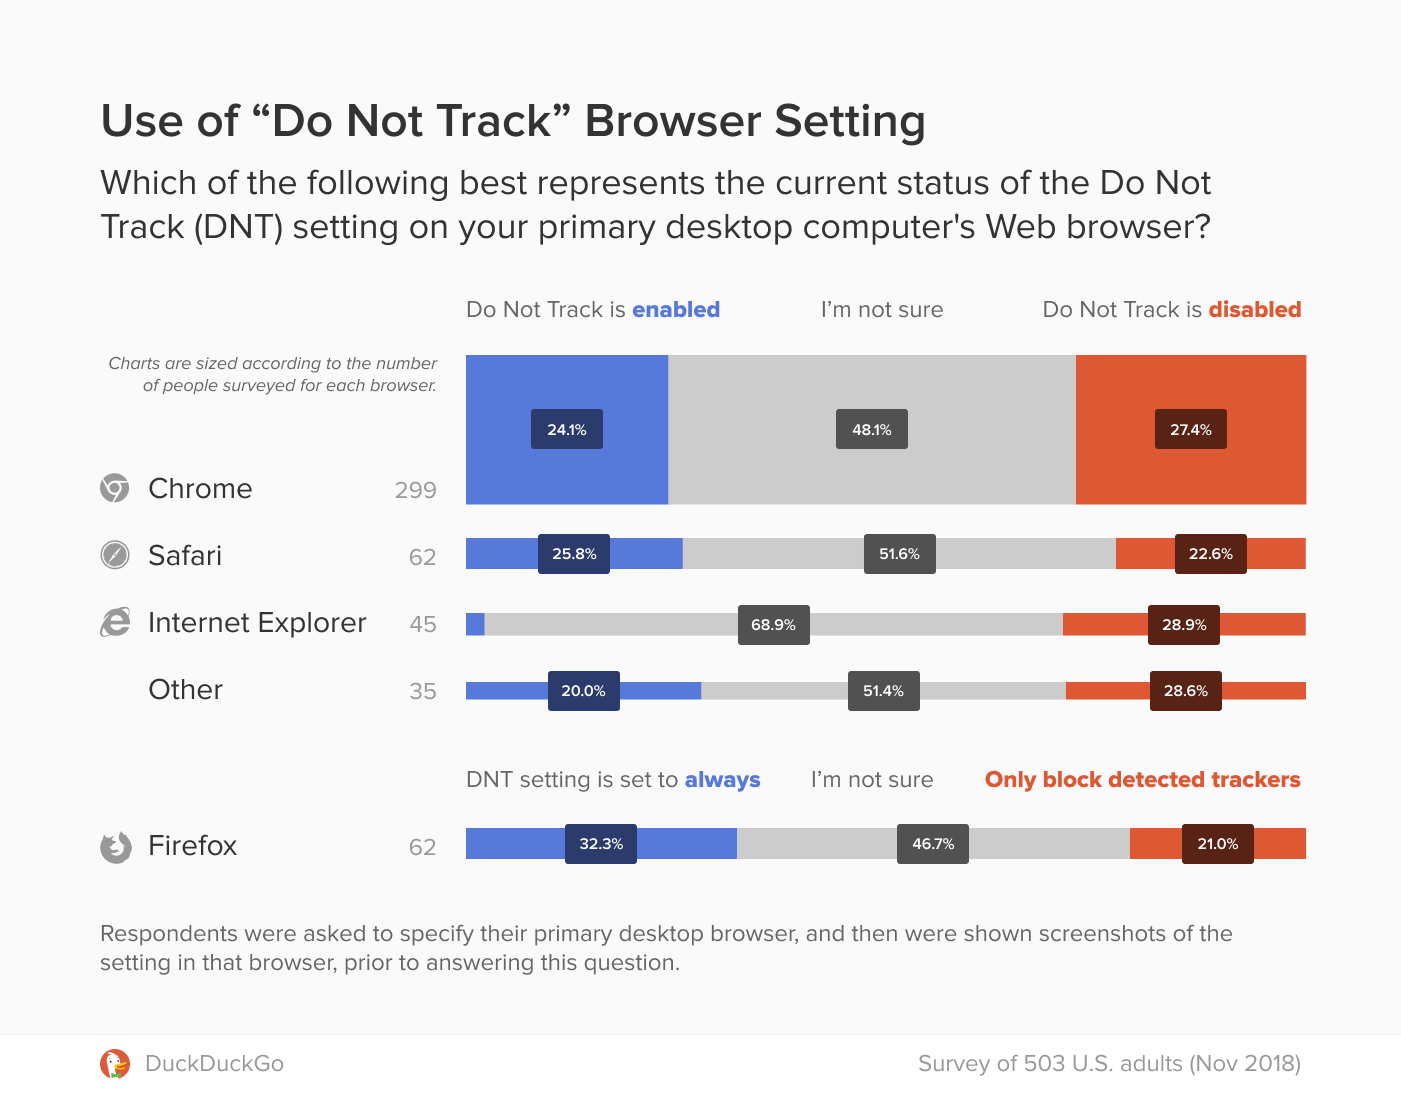 Graph showing survey responses about the current status of the Do Not Track setting in respondent's primary desktop browser